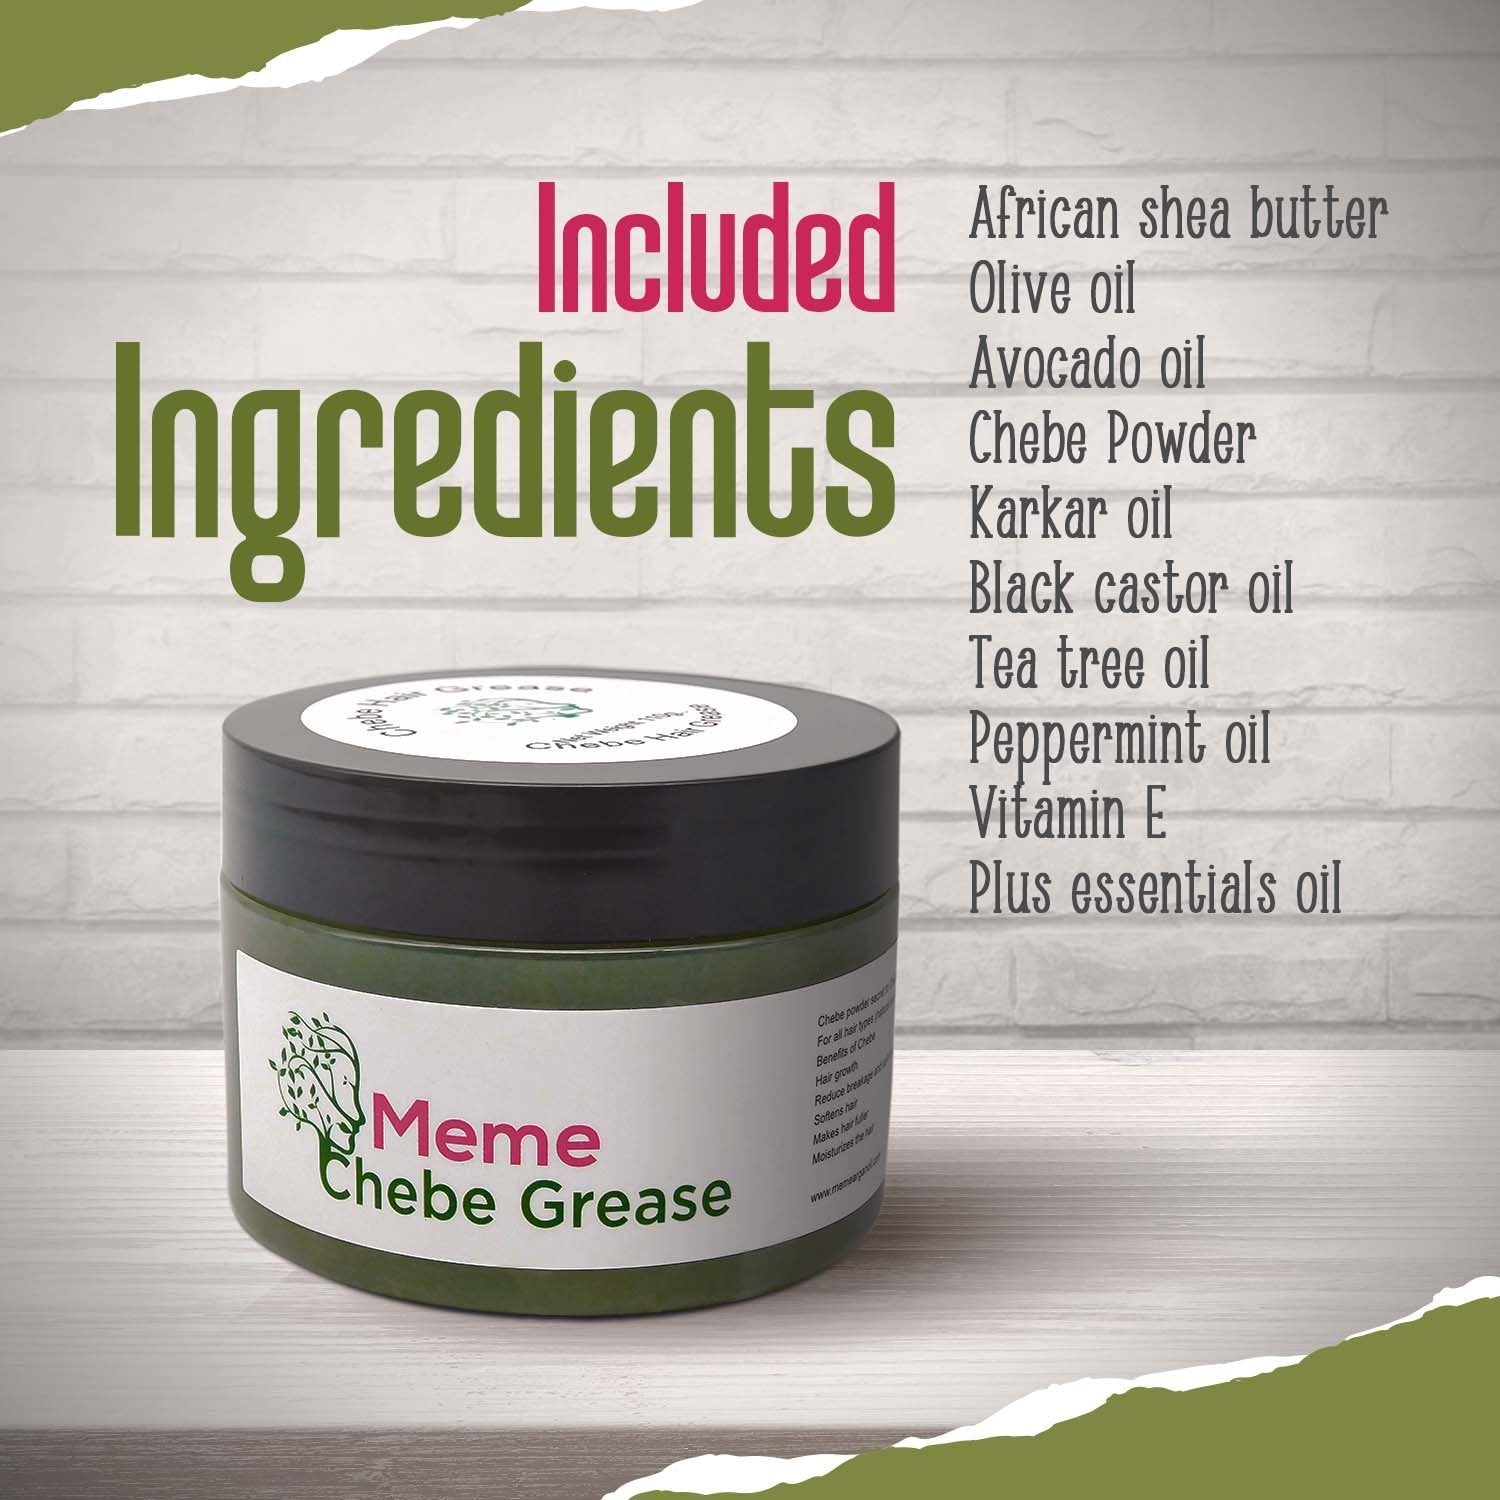 MEME Chebe Hair Grease for Hair Growth - 4 fl oz, Hair Pomade Hydrating Hair Mask for Curly Hair with Chebe Powder and Karkar Oil - Perfect for Hair Shine, Moisturizes Hair and Promote Hair Growth